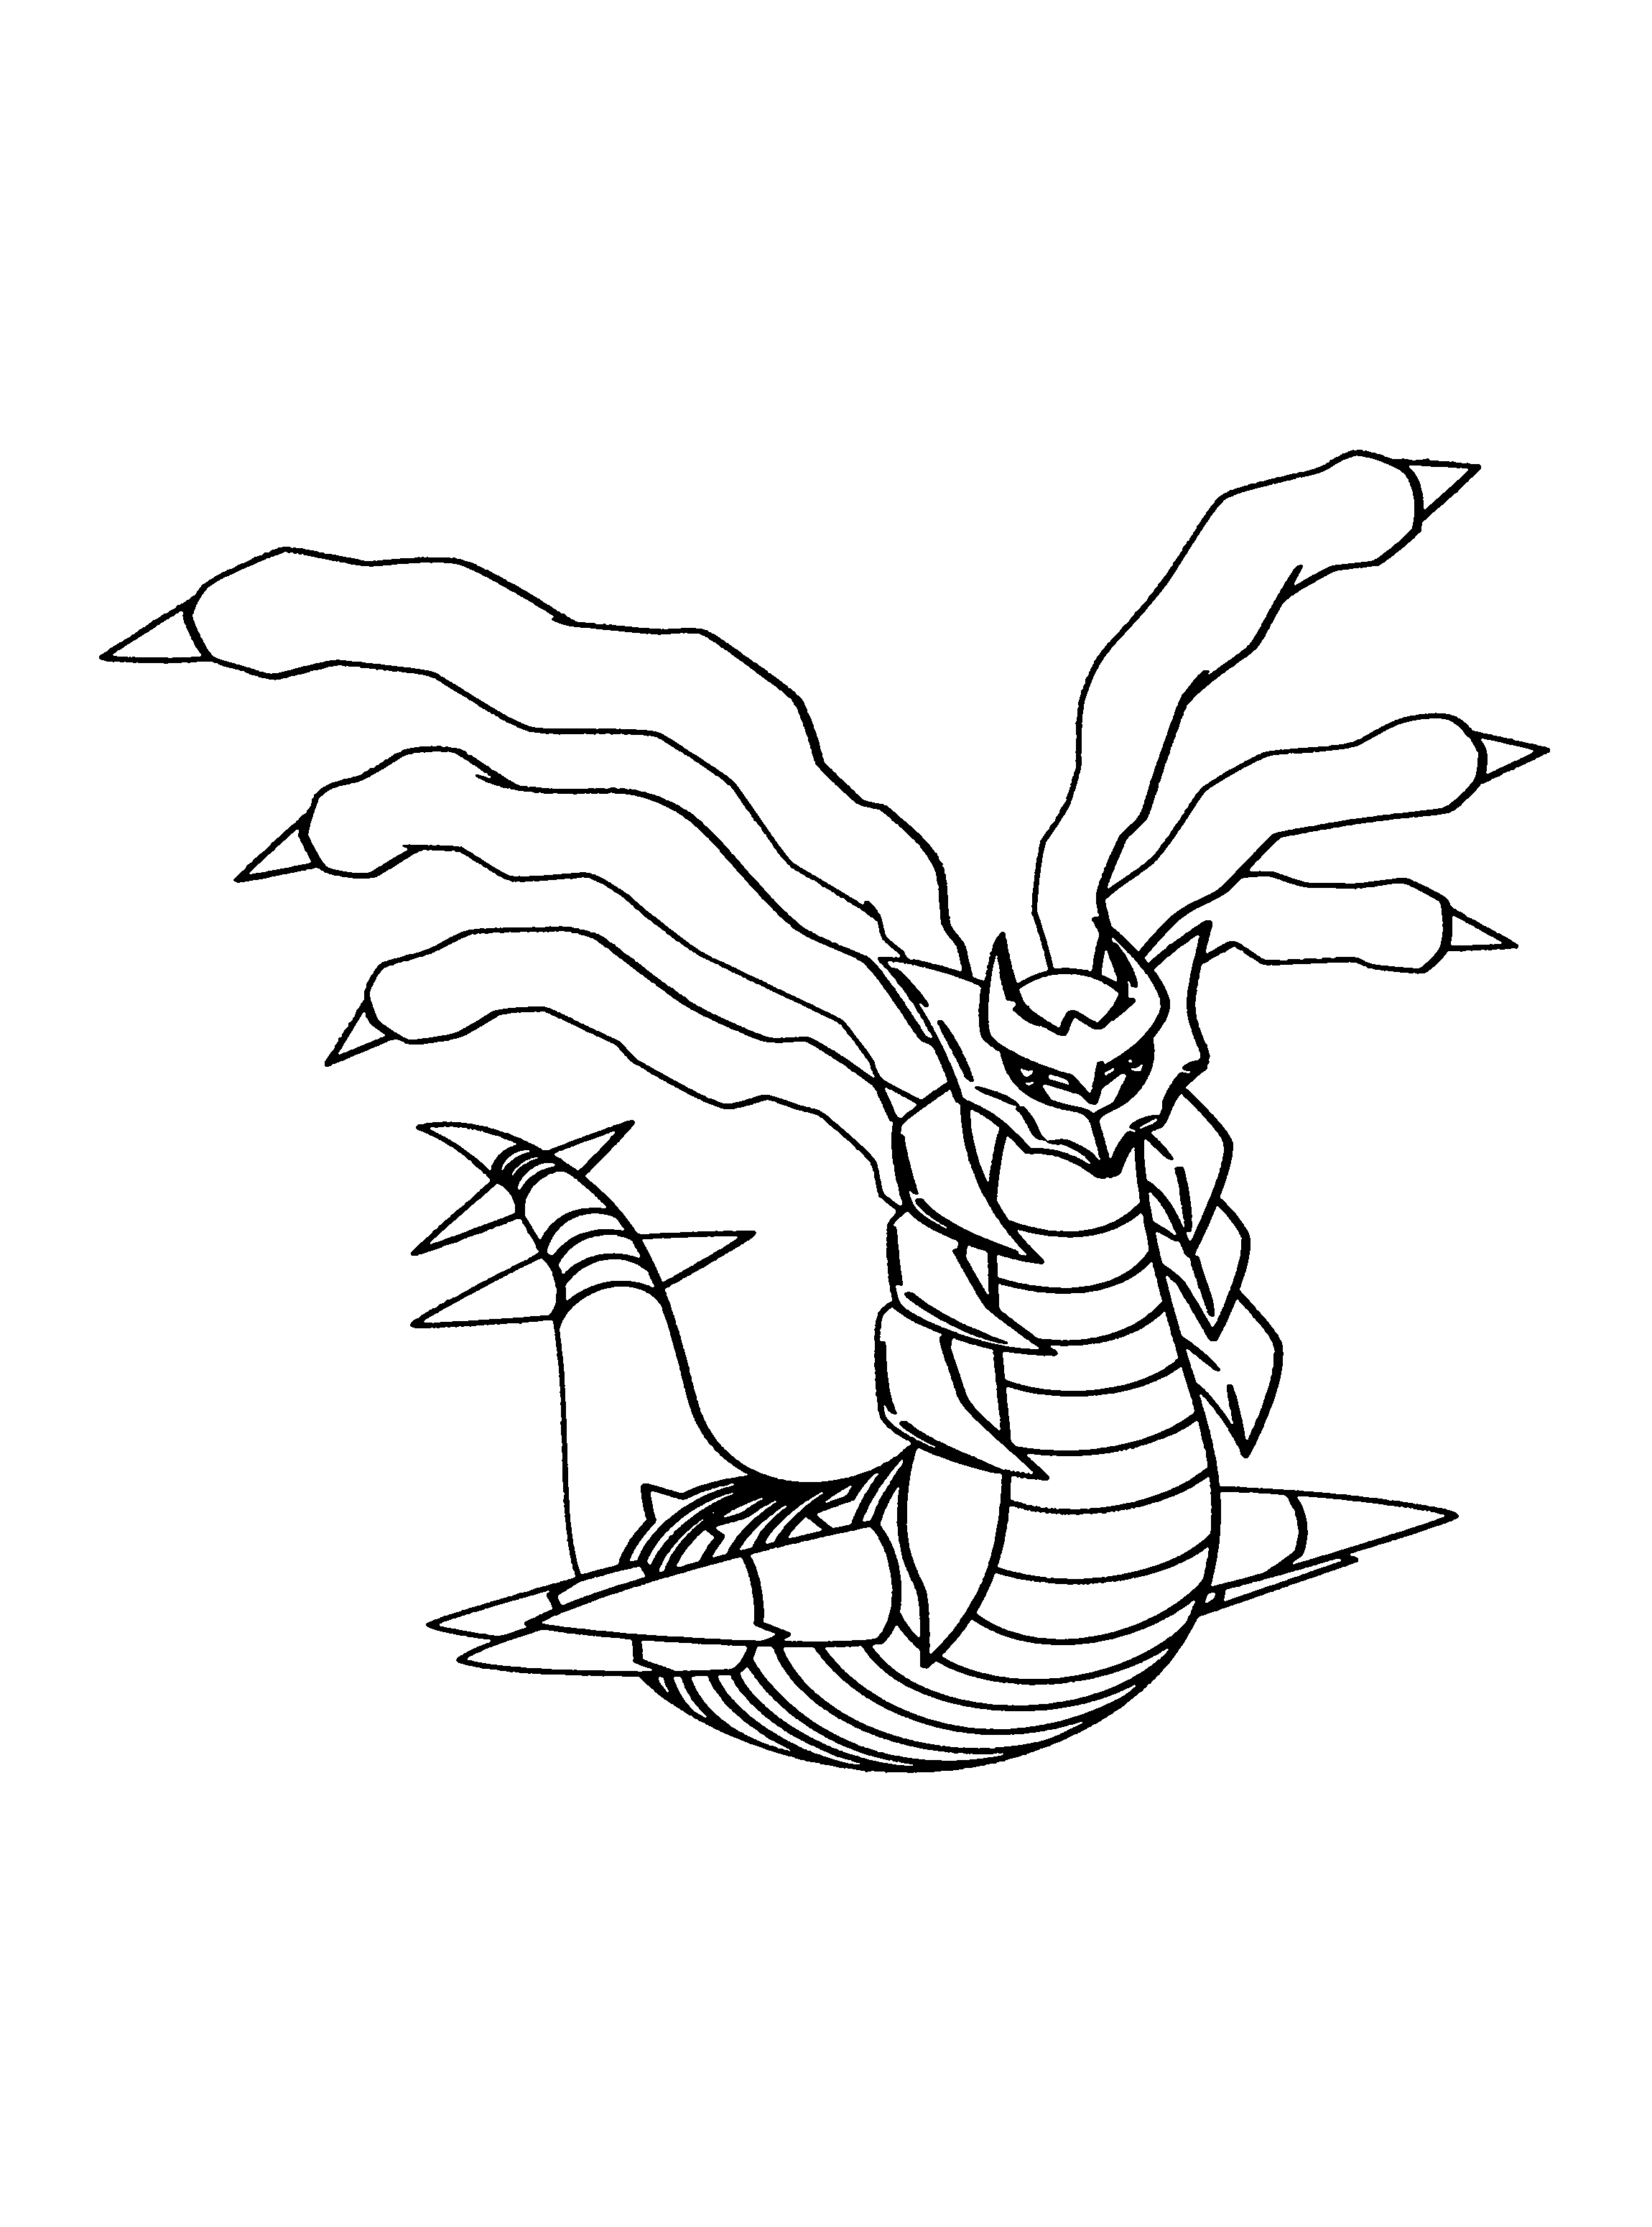 animated-coloring-pages-pokemon-image-0232